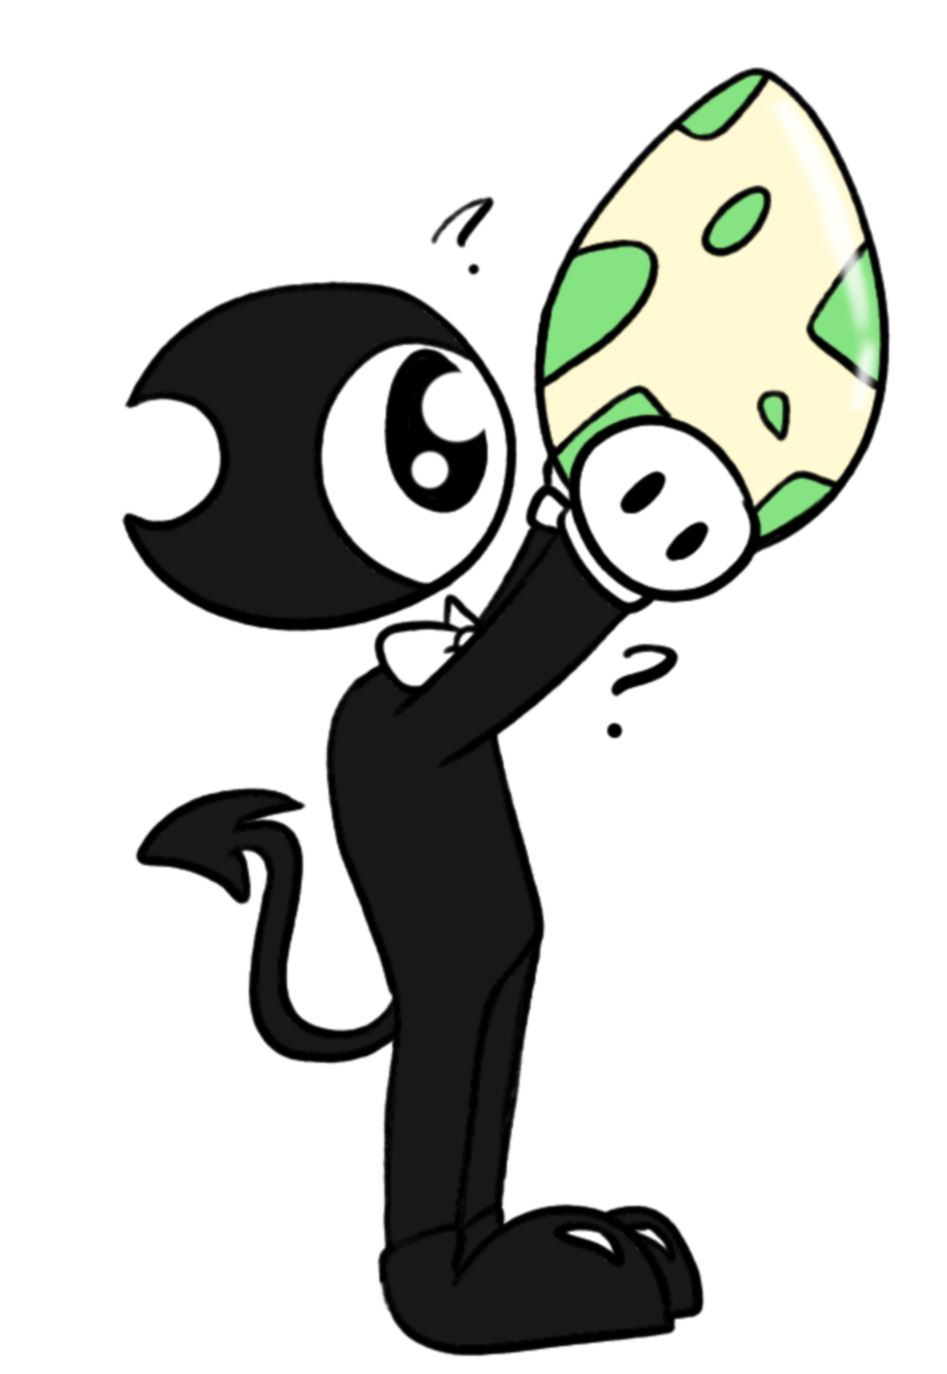 Positively silly. — datsheepbeep: What if Bendy was in the Cuphead